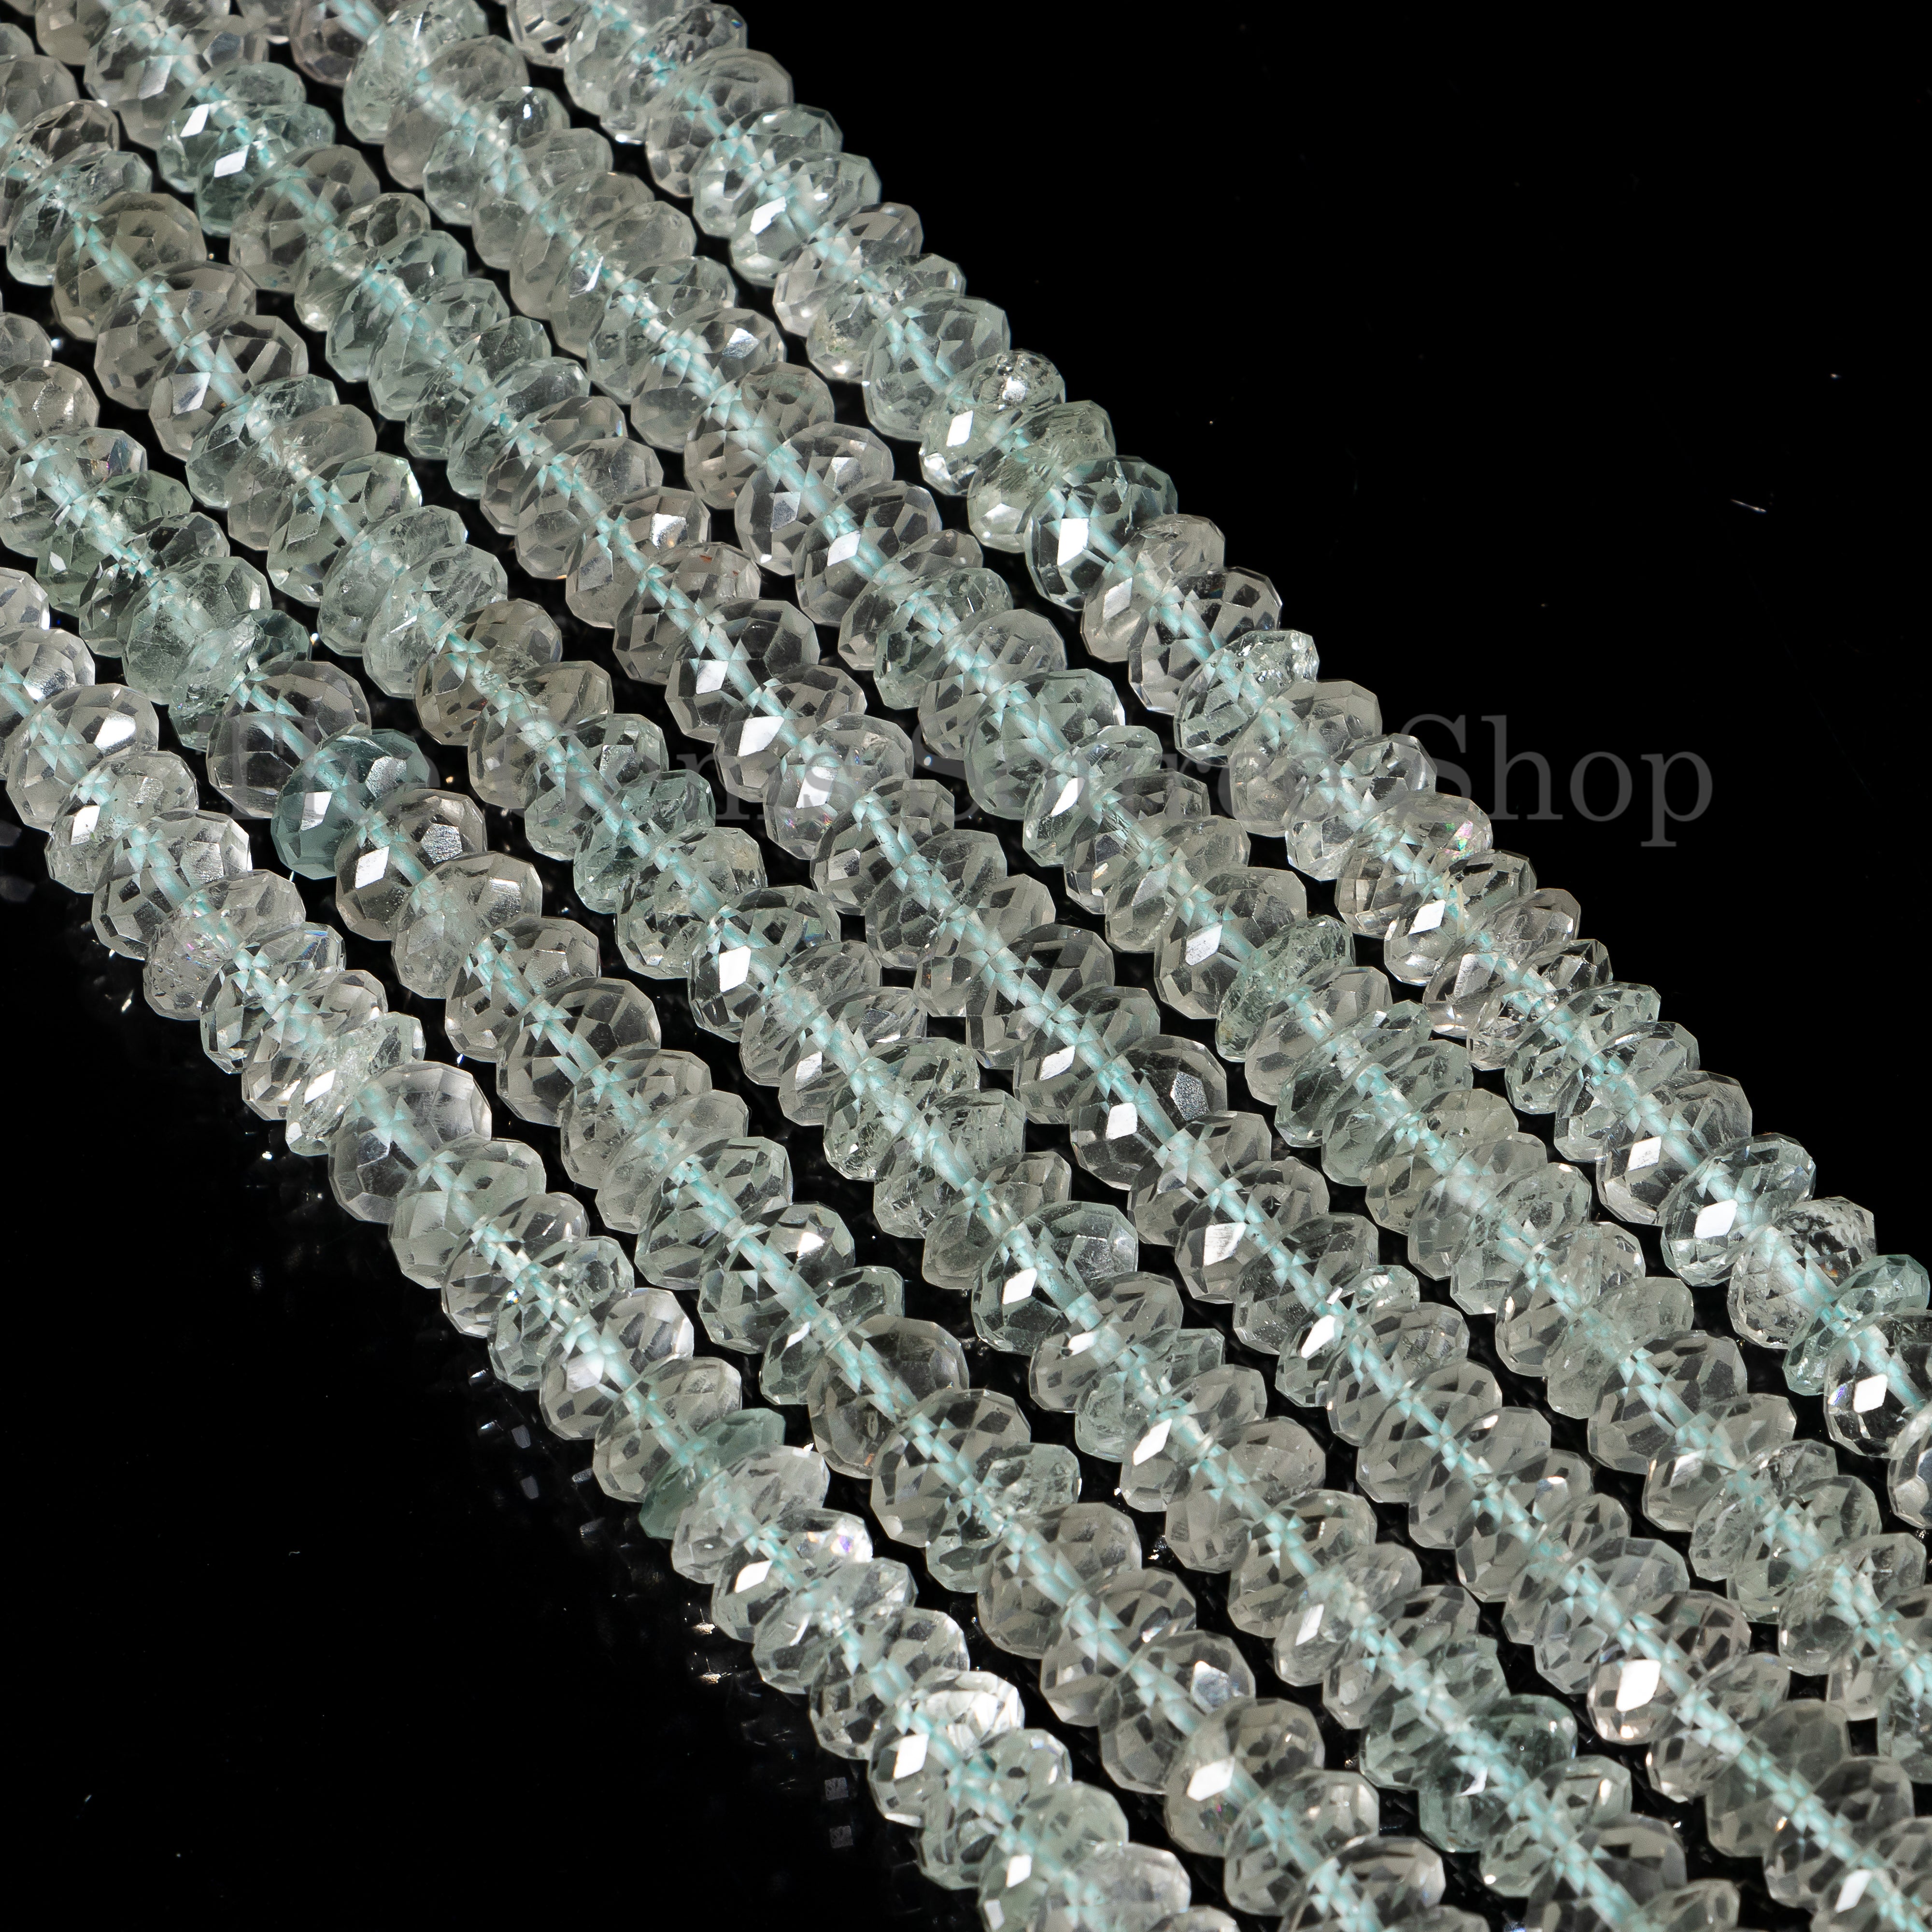 Natural Aquamarine Rondelle Faceted Beads, Aquamarine 7-8mm Gemstone Beads for Jewelry Making. TGS-5143